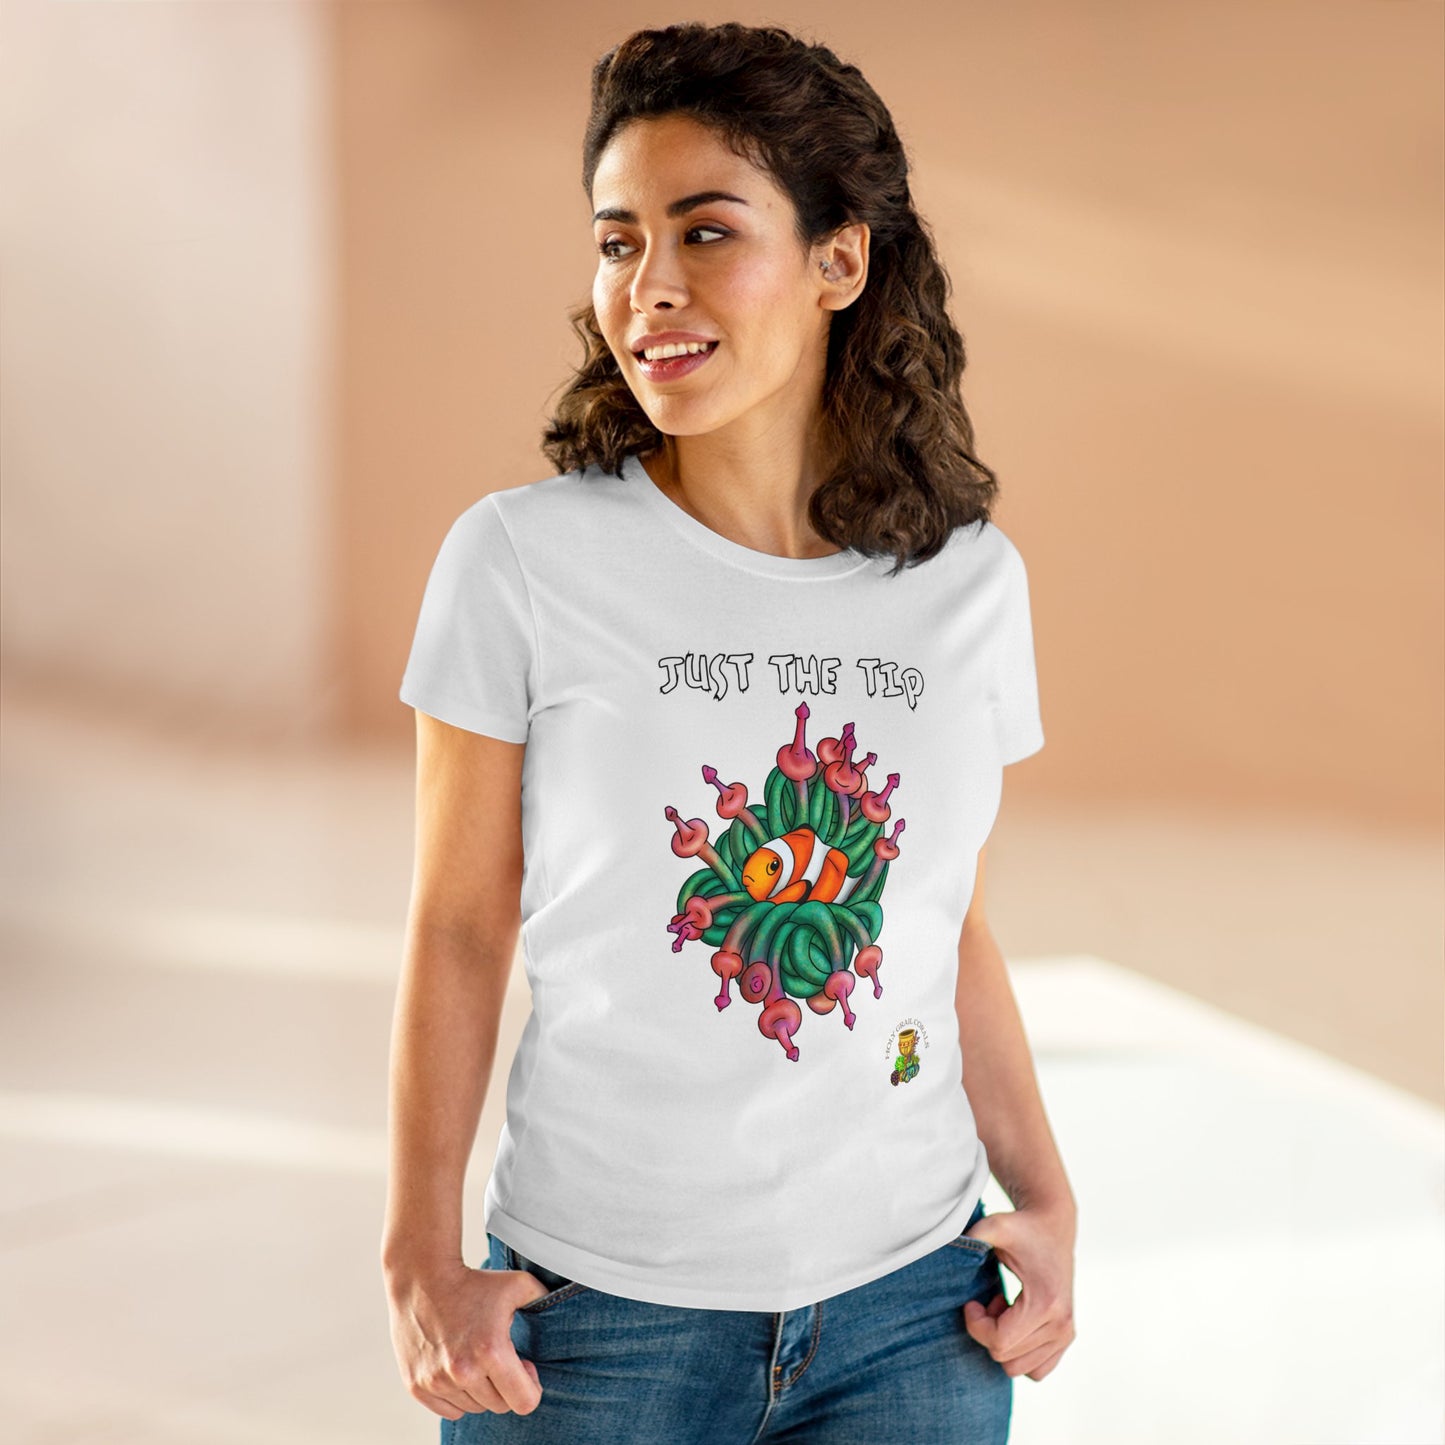 "Just The Tip" Bubble Tip Anemone Women's Cotton Tee